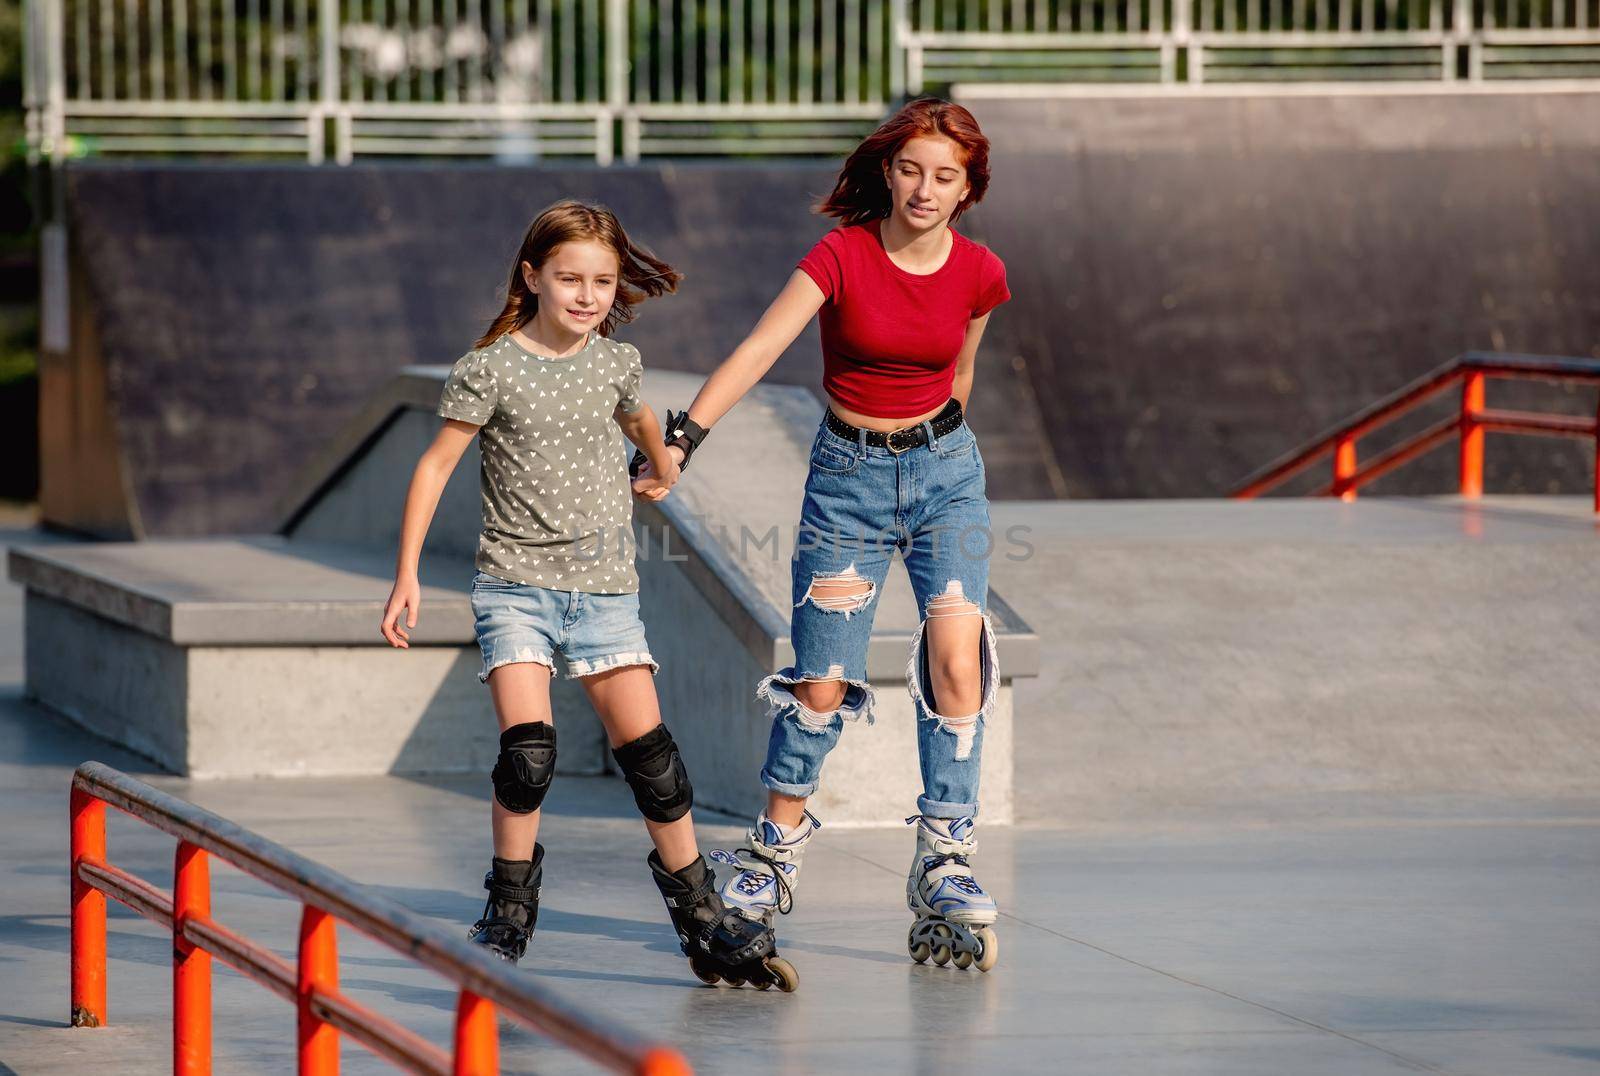 Two girls wearing roller skates riding together at park ramp. Sisters rolleblading outdoors at summer